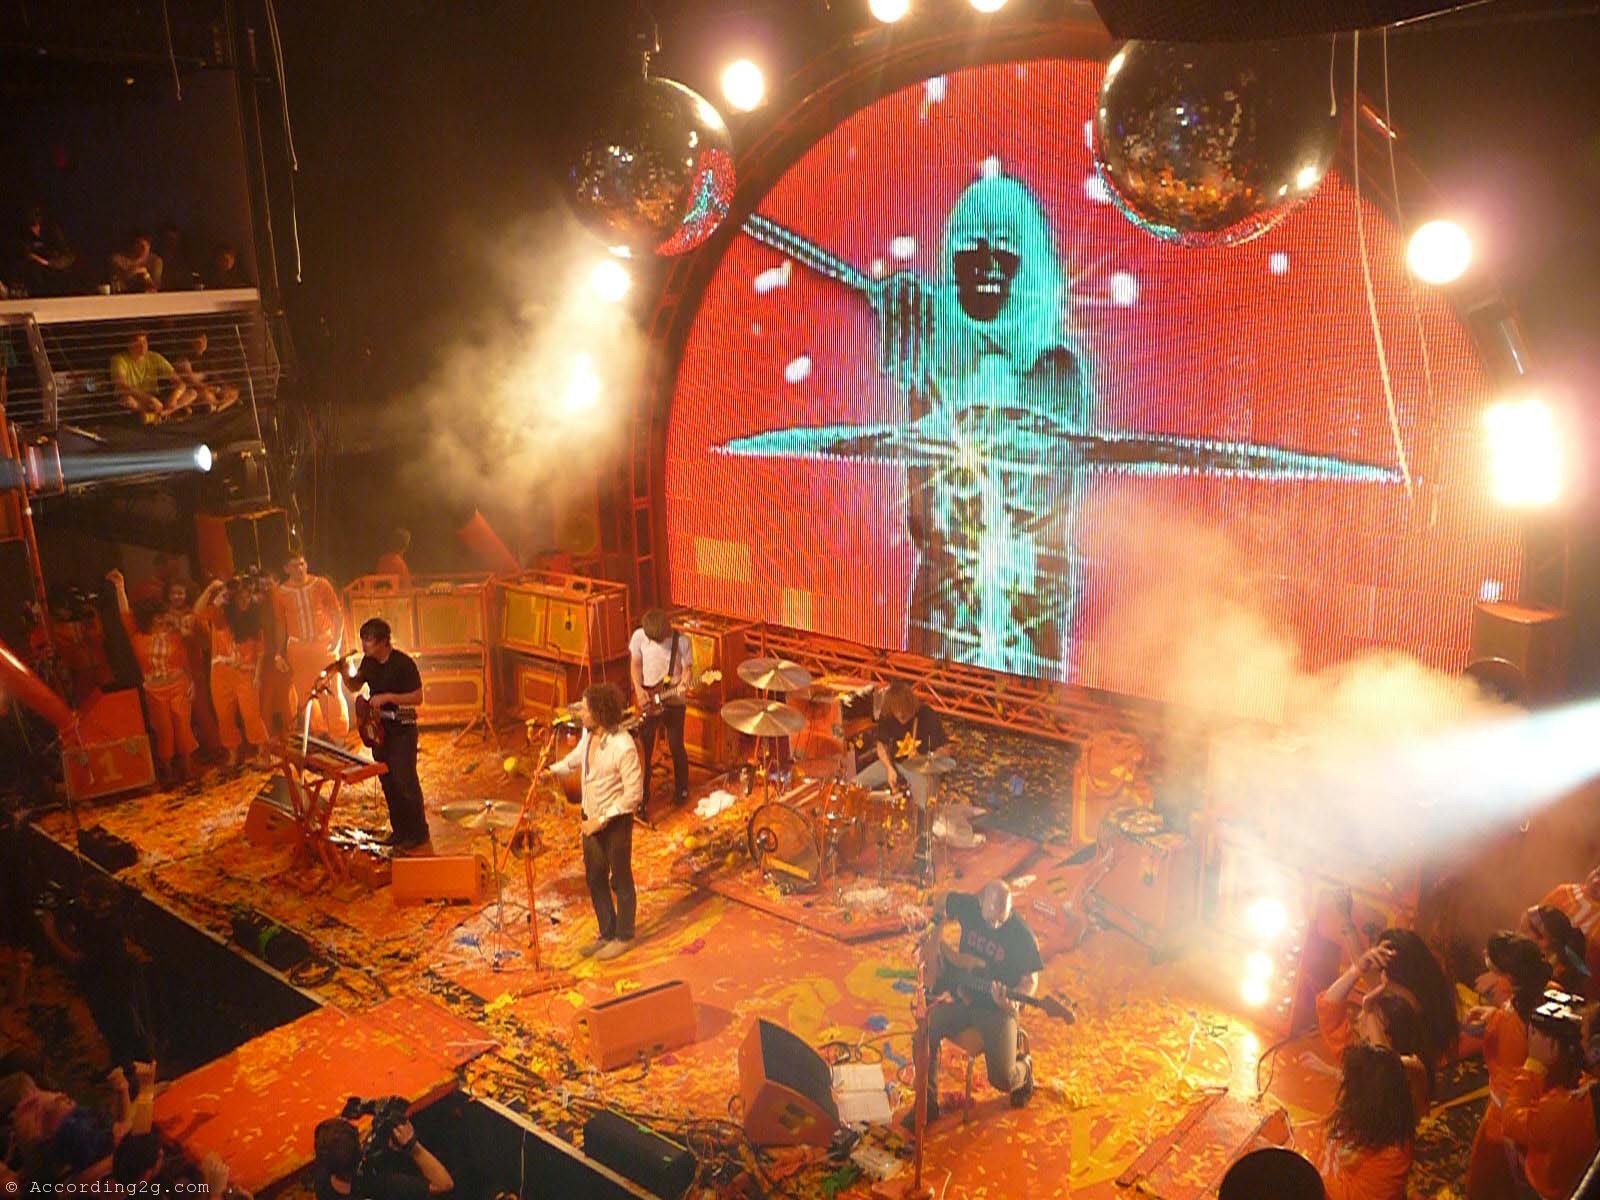 More Photos of The Flaming Lips According 2 G